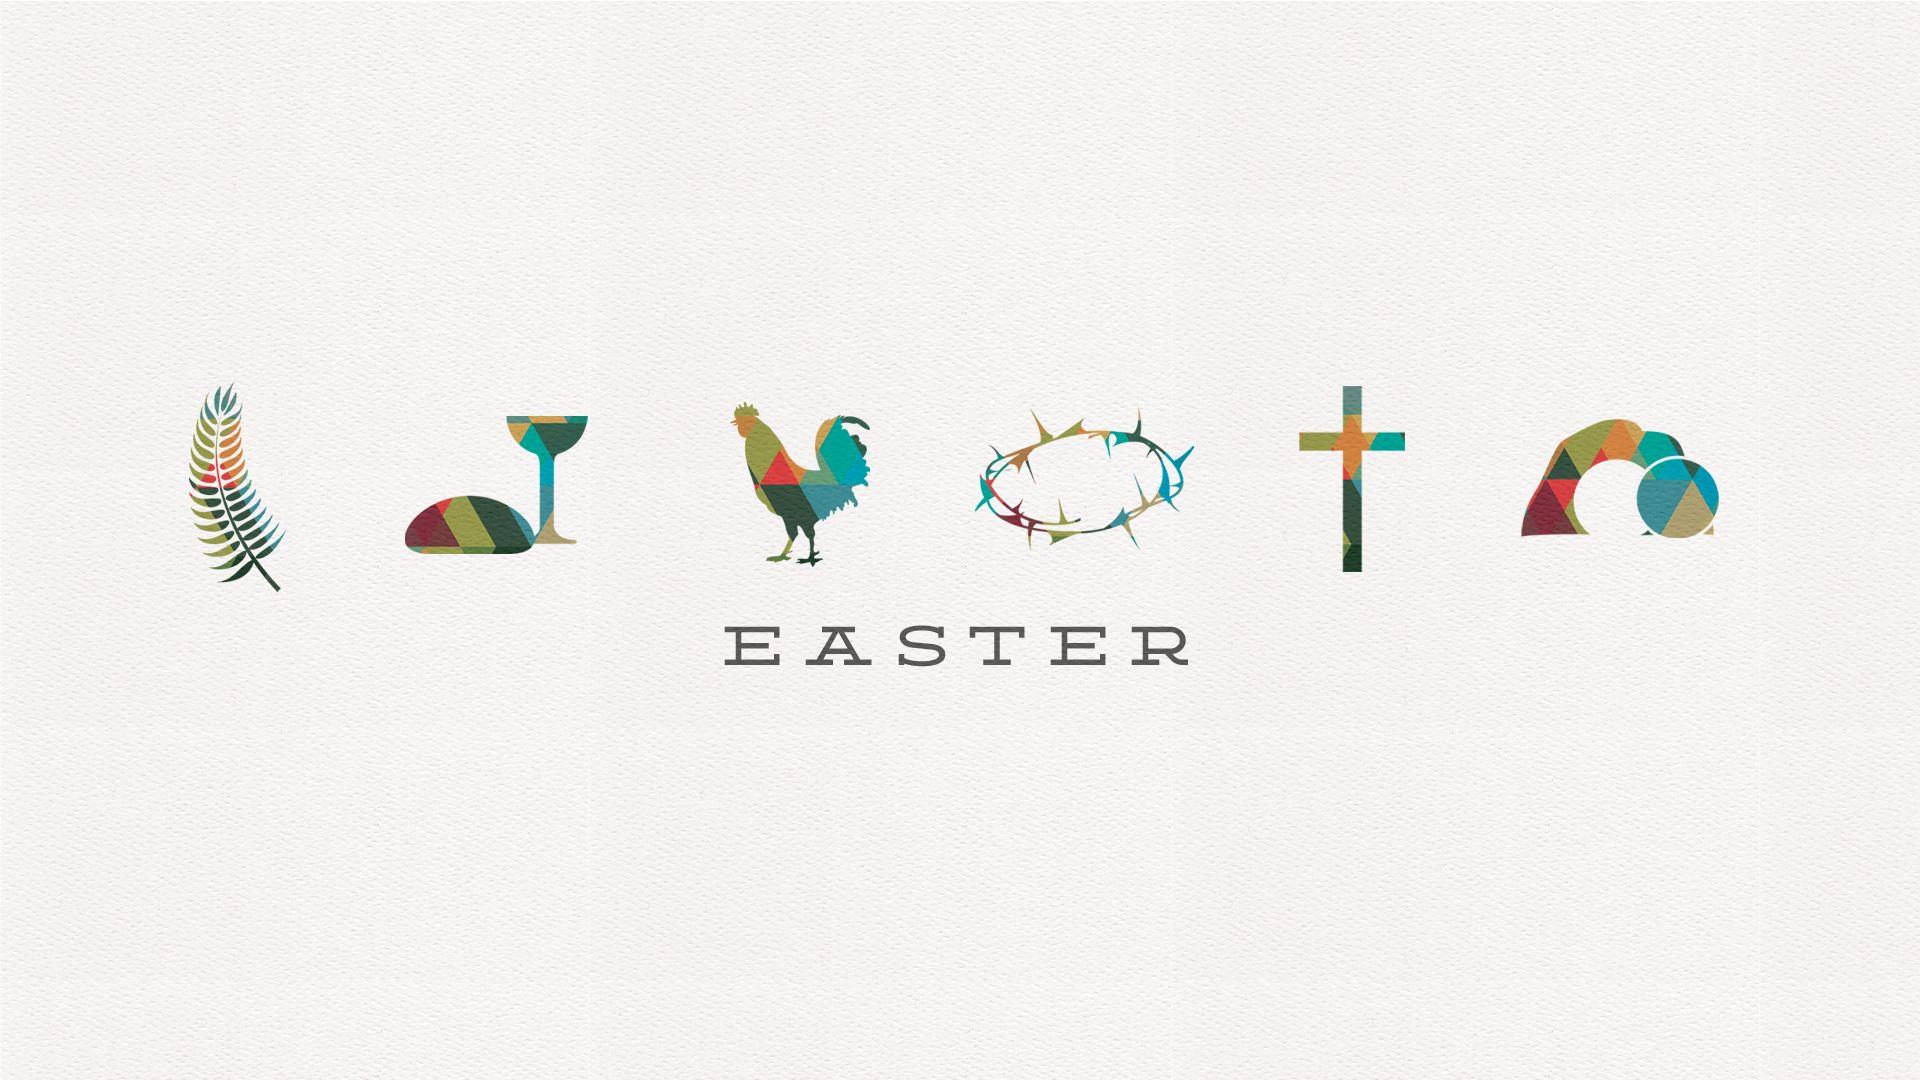 Happy Easter 2018 HD Wallpaper And Image Download Free